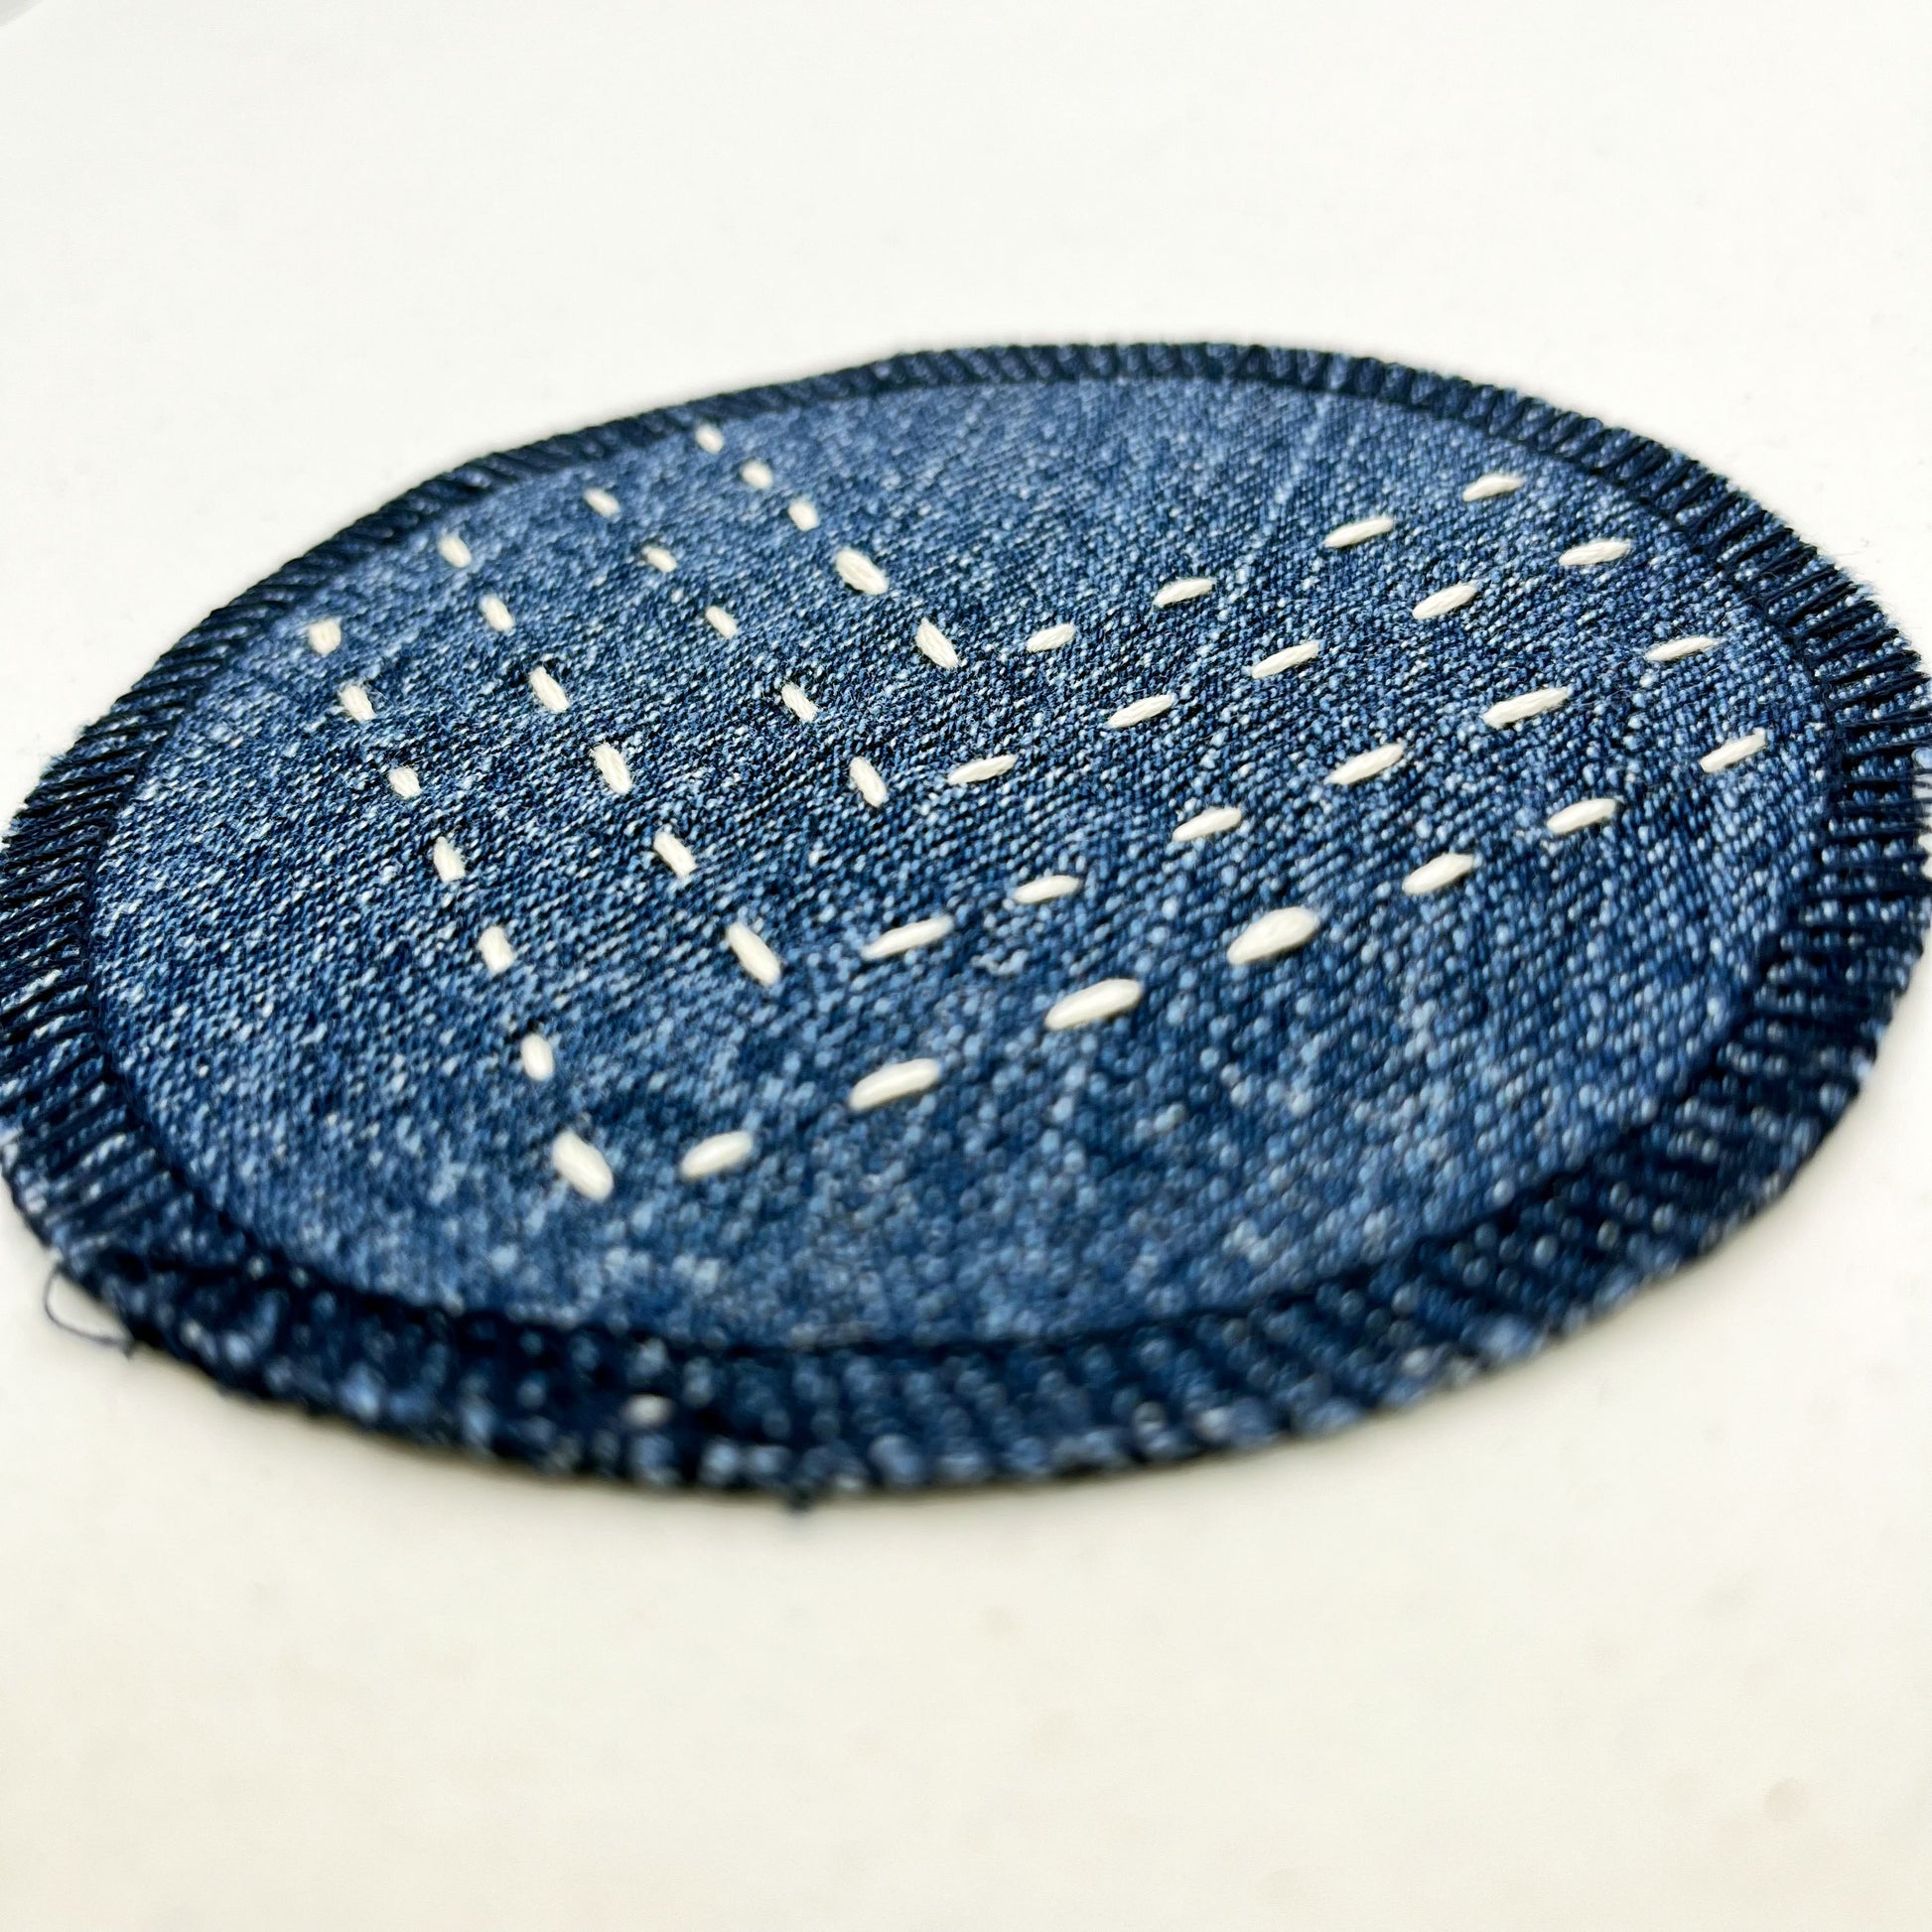 a close up angled view of a circle shaped patch made out of denim, with overlocked edges, with rows of ivory running stitches in a chevron pattern, on a white background